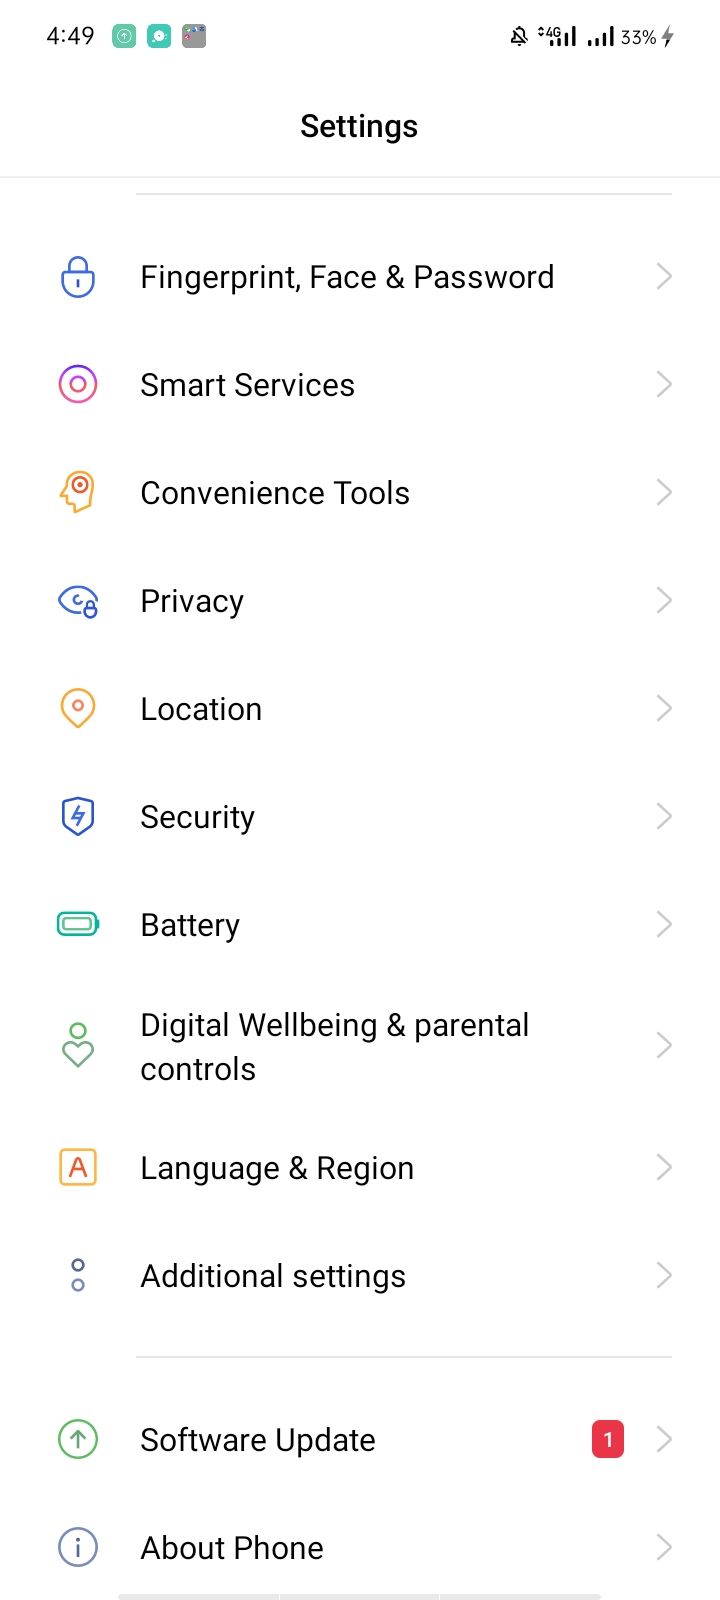 Additional Settings in Android Settings